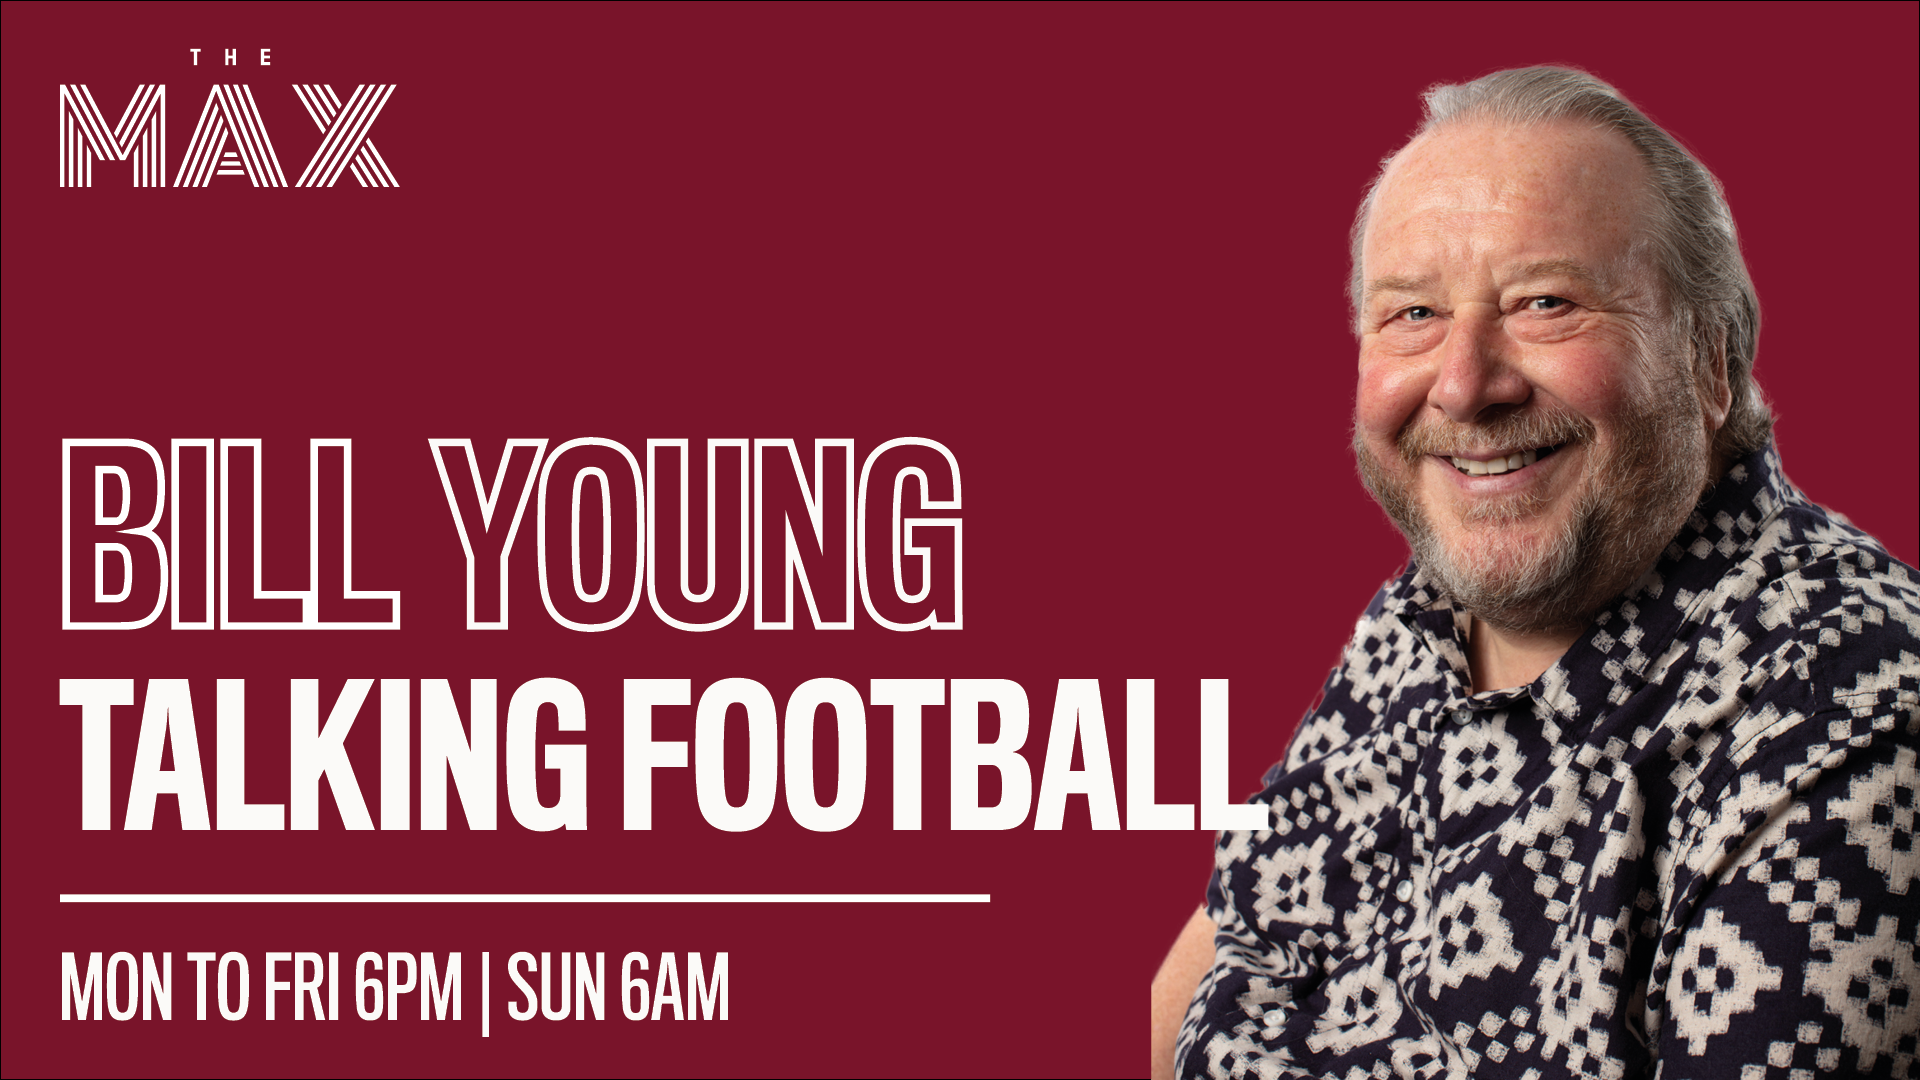 Talking Football with Bill Young - Monday 15th March